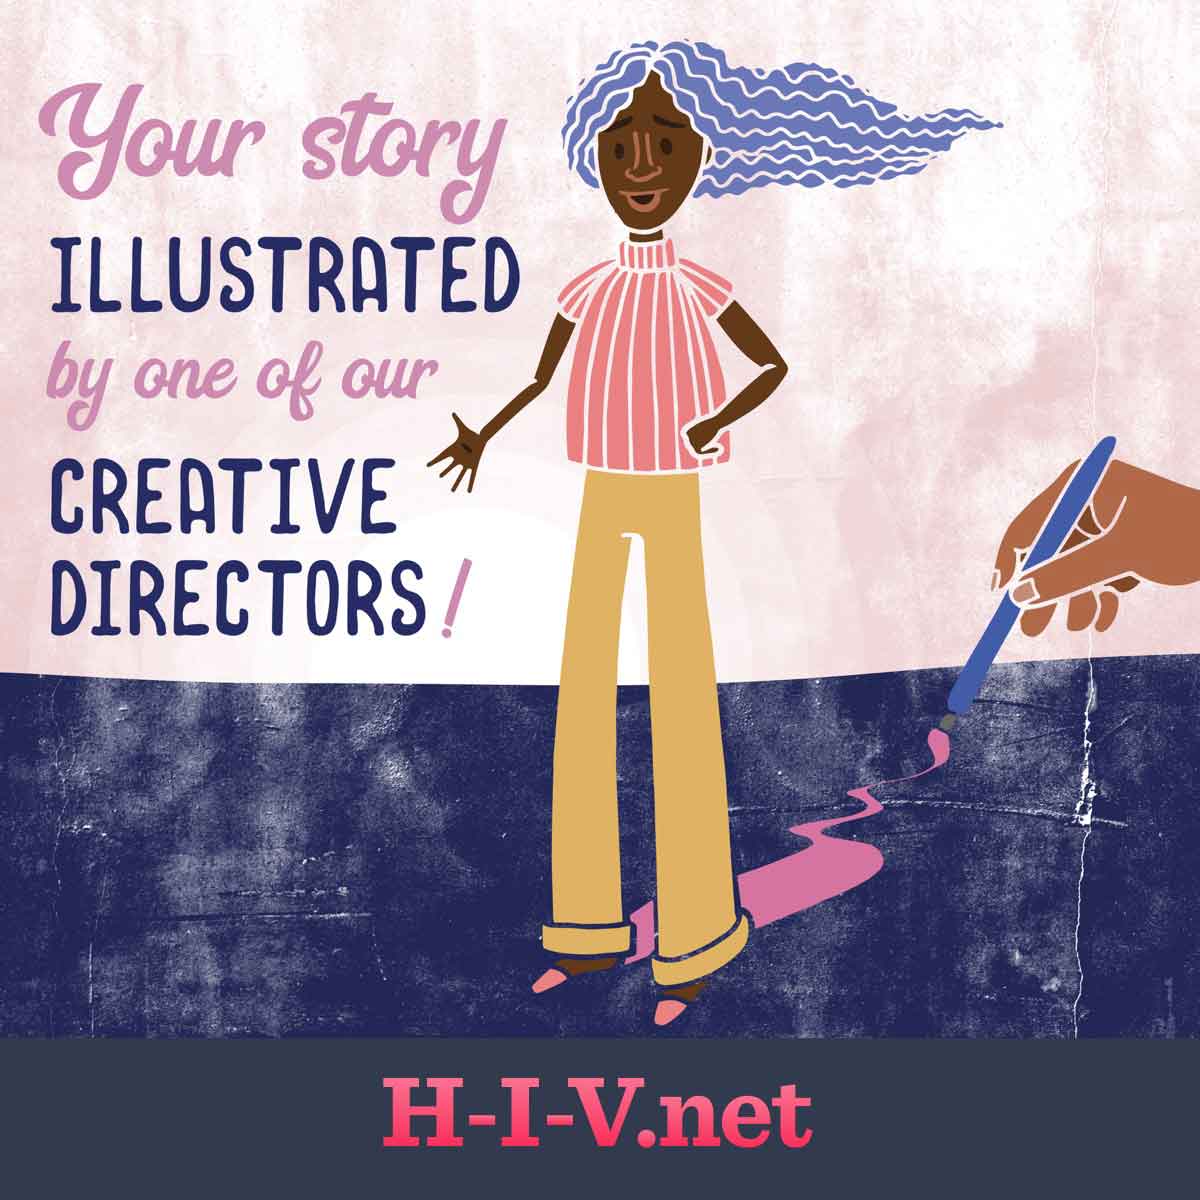 a woman with her path being painted by a giant hand, text next to her reads "your story illustrated by one of our creative directors!"